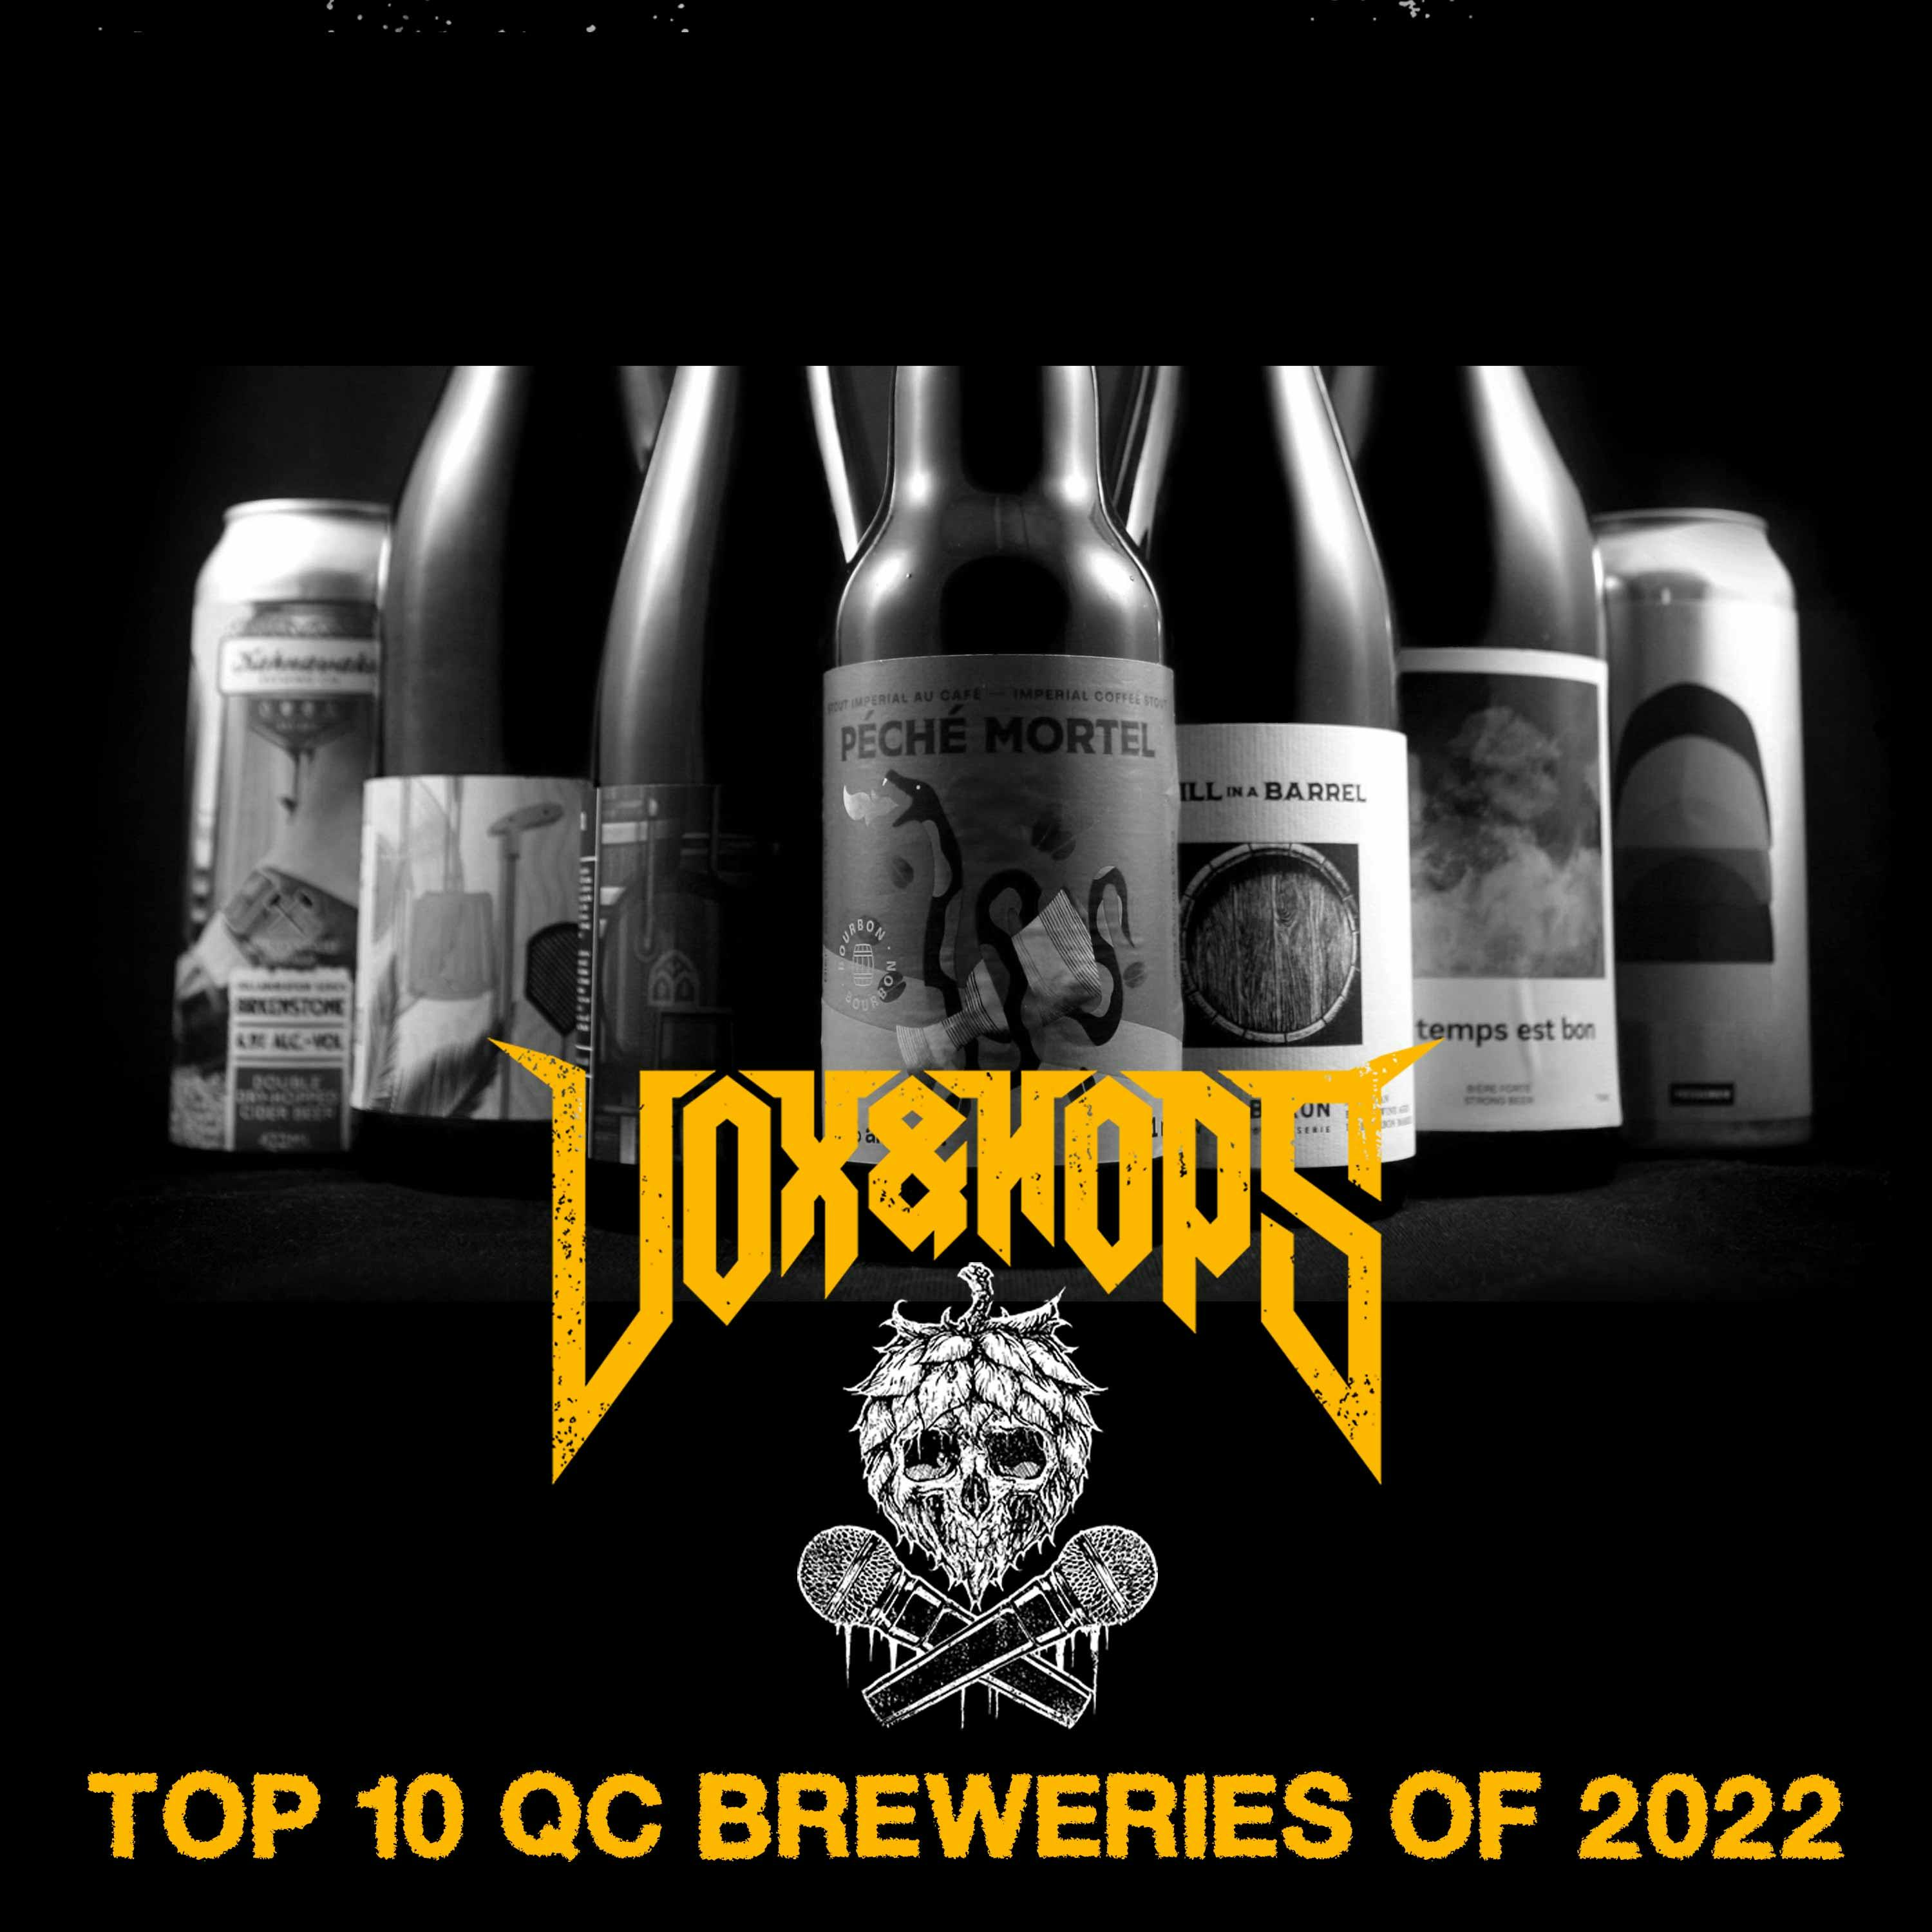 Top 10 Québec Microbreweries of 2022 with Craig Thorn (BAOS Podcast) & Noah Forrest (Beerism)